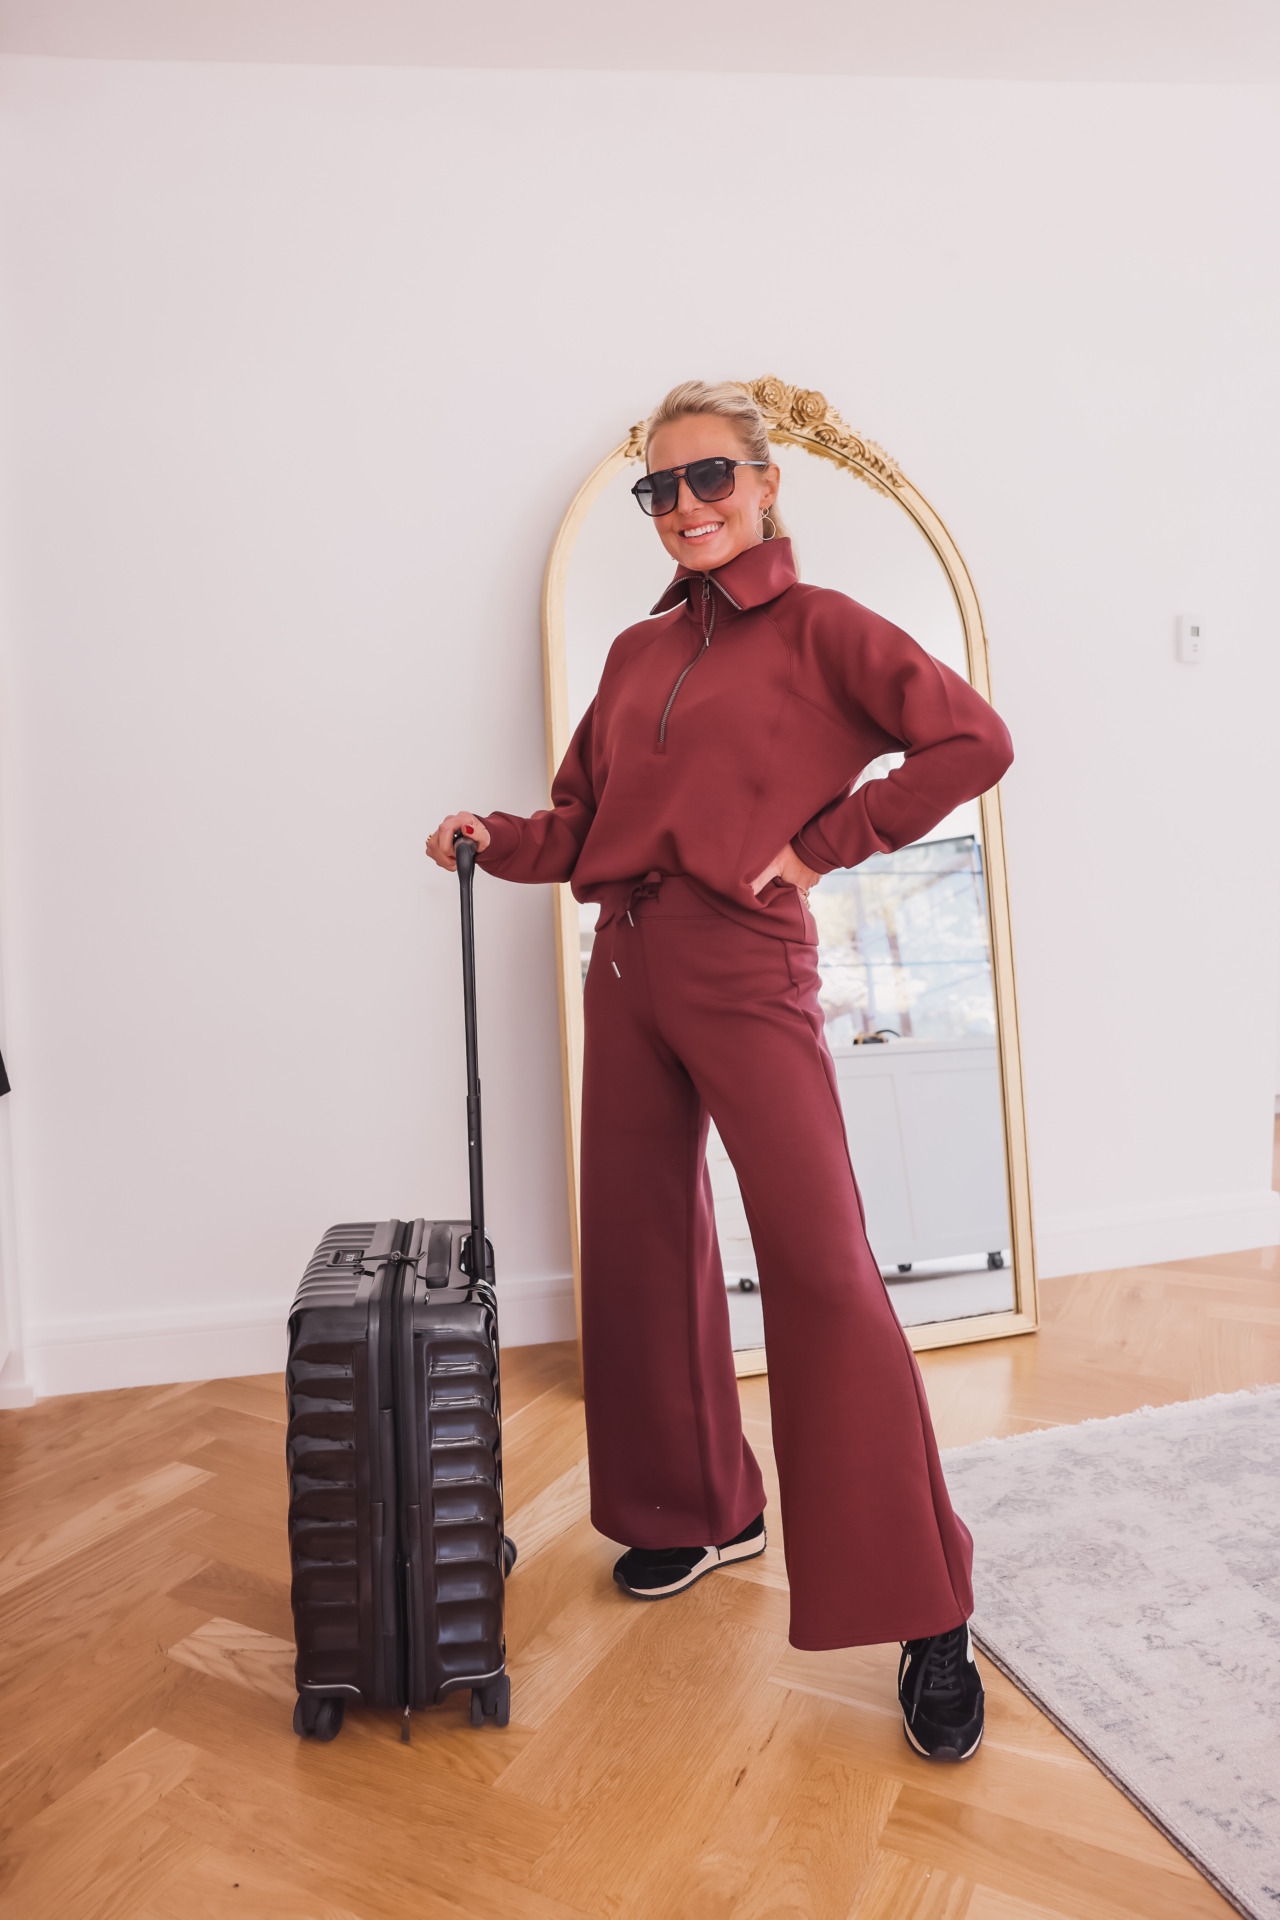 How to put together the perfect travel outfit